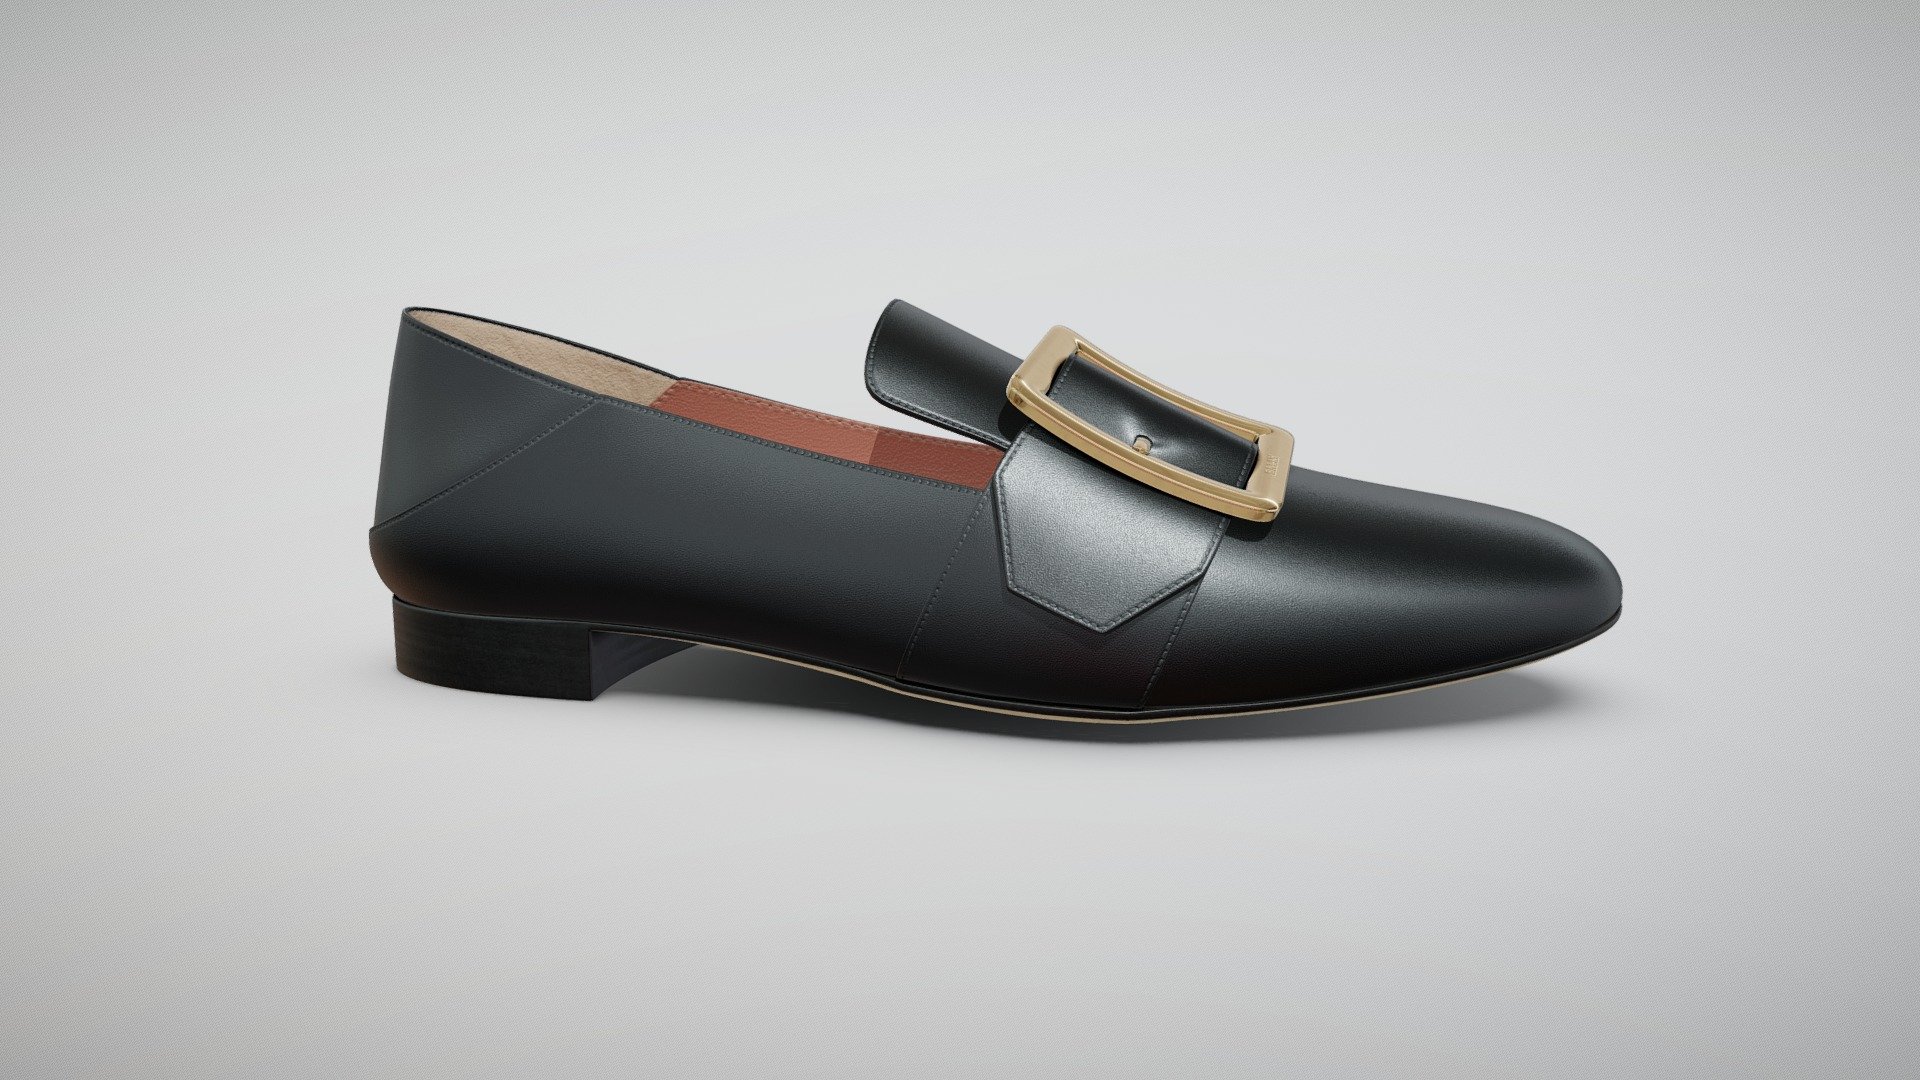 BALLY Jannelle Shoe High resolution model
VR and game ready for high quality Architectural Visualization - BALLY Jannelle Shoe - 3D model by InvrsionAdmin 3d model